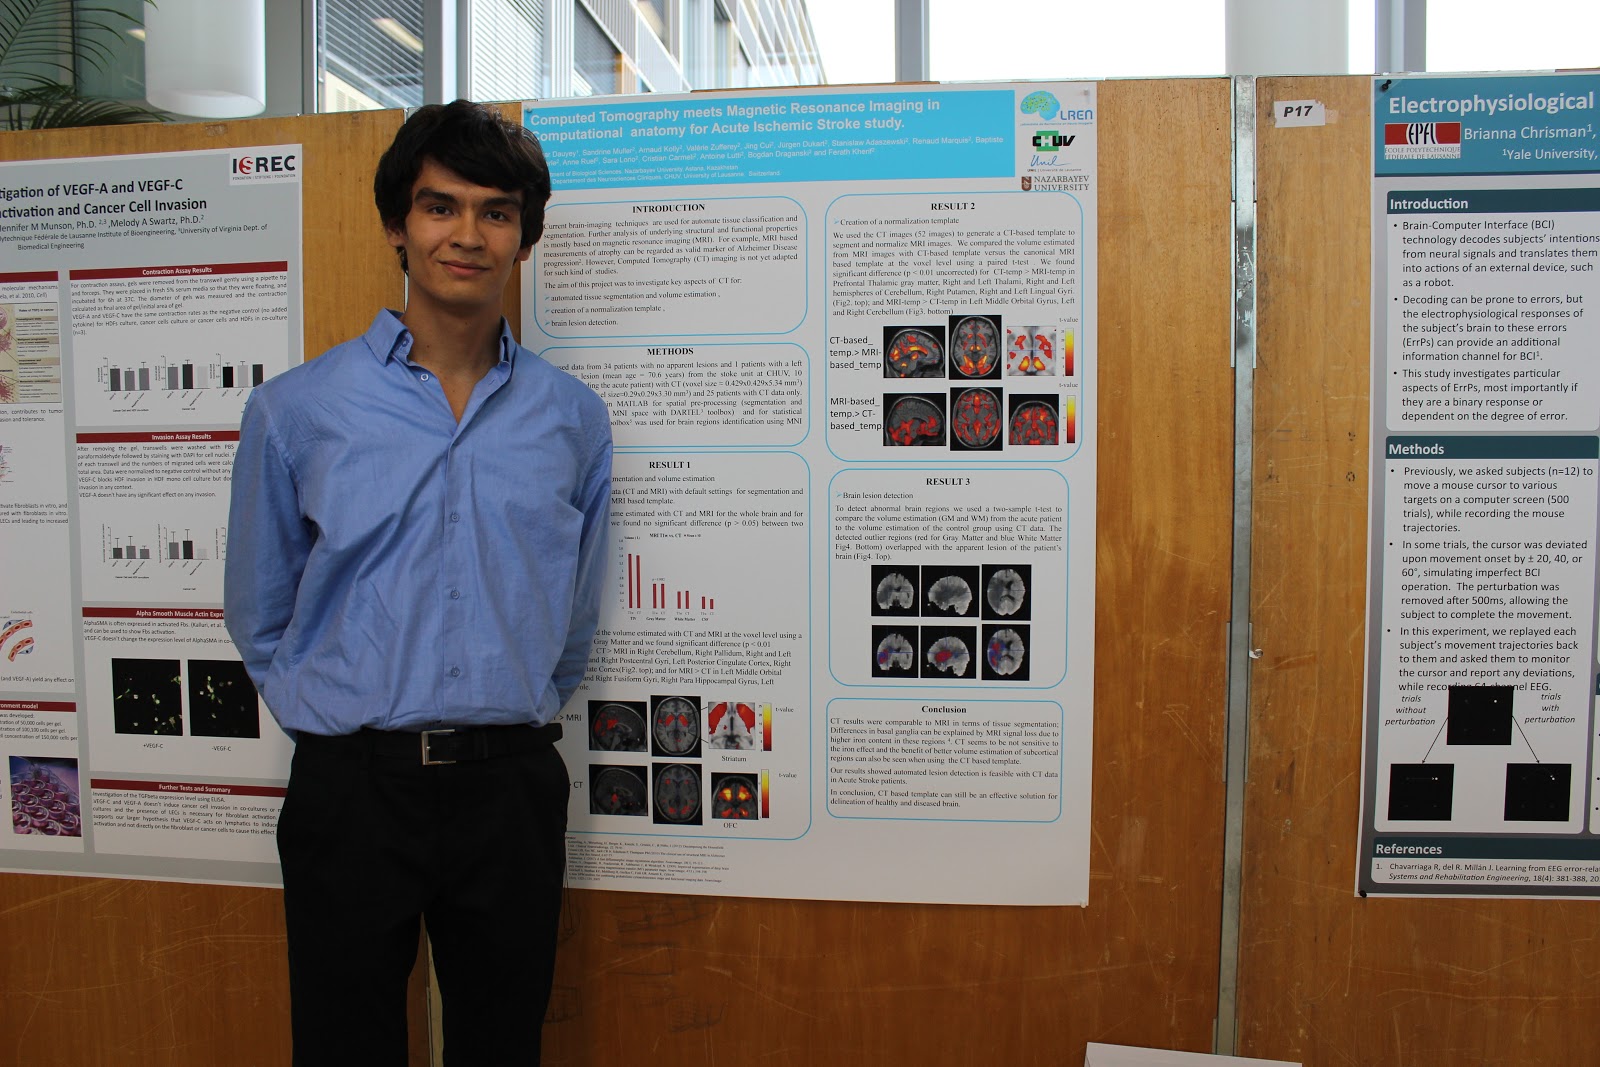 oral presentation and poster presentation in academic conferences